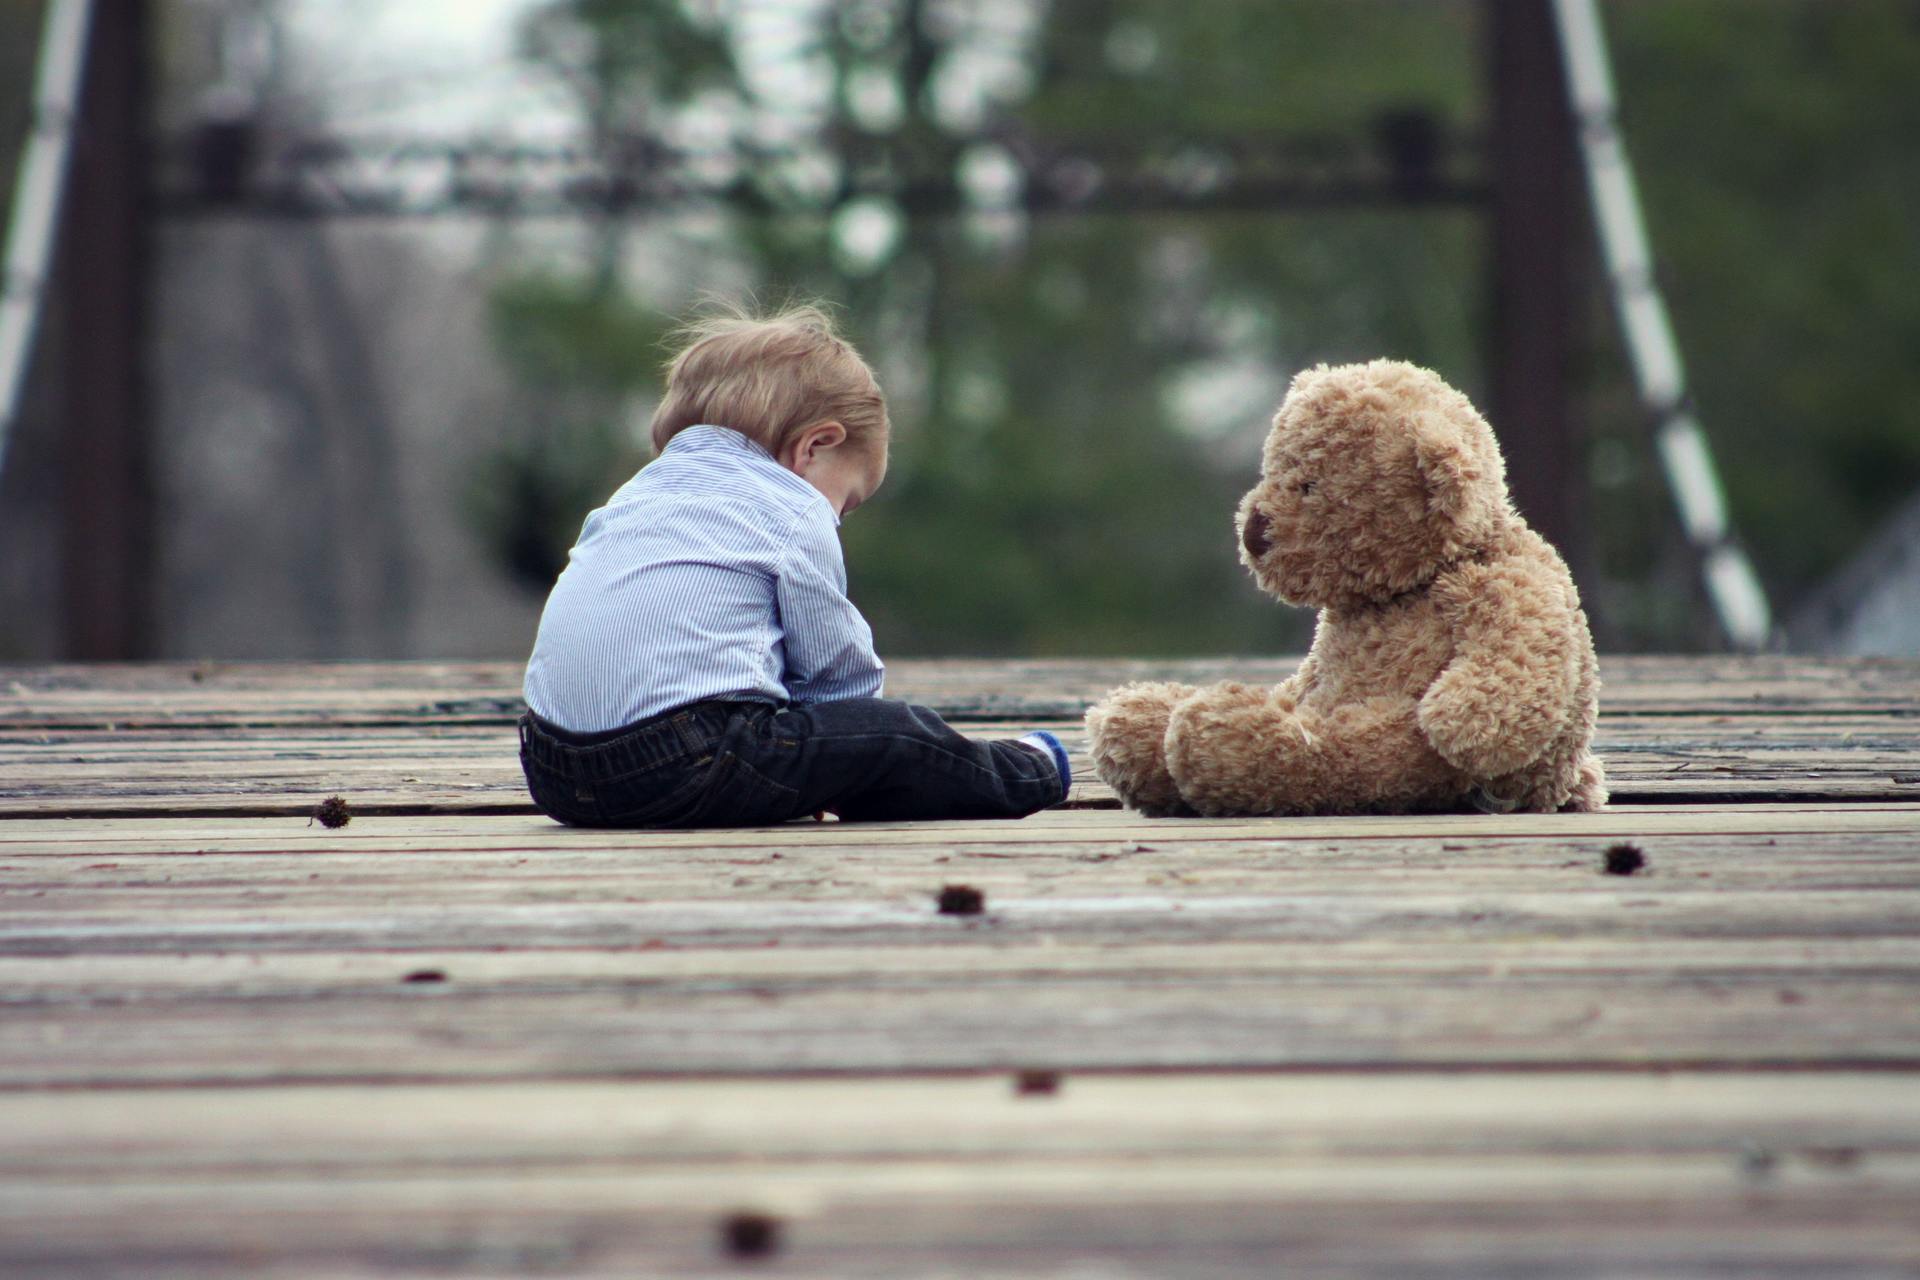 Toddler sitting alone with a teddy bear